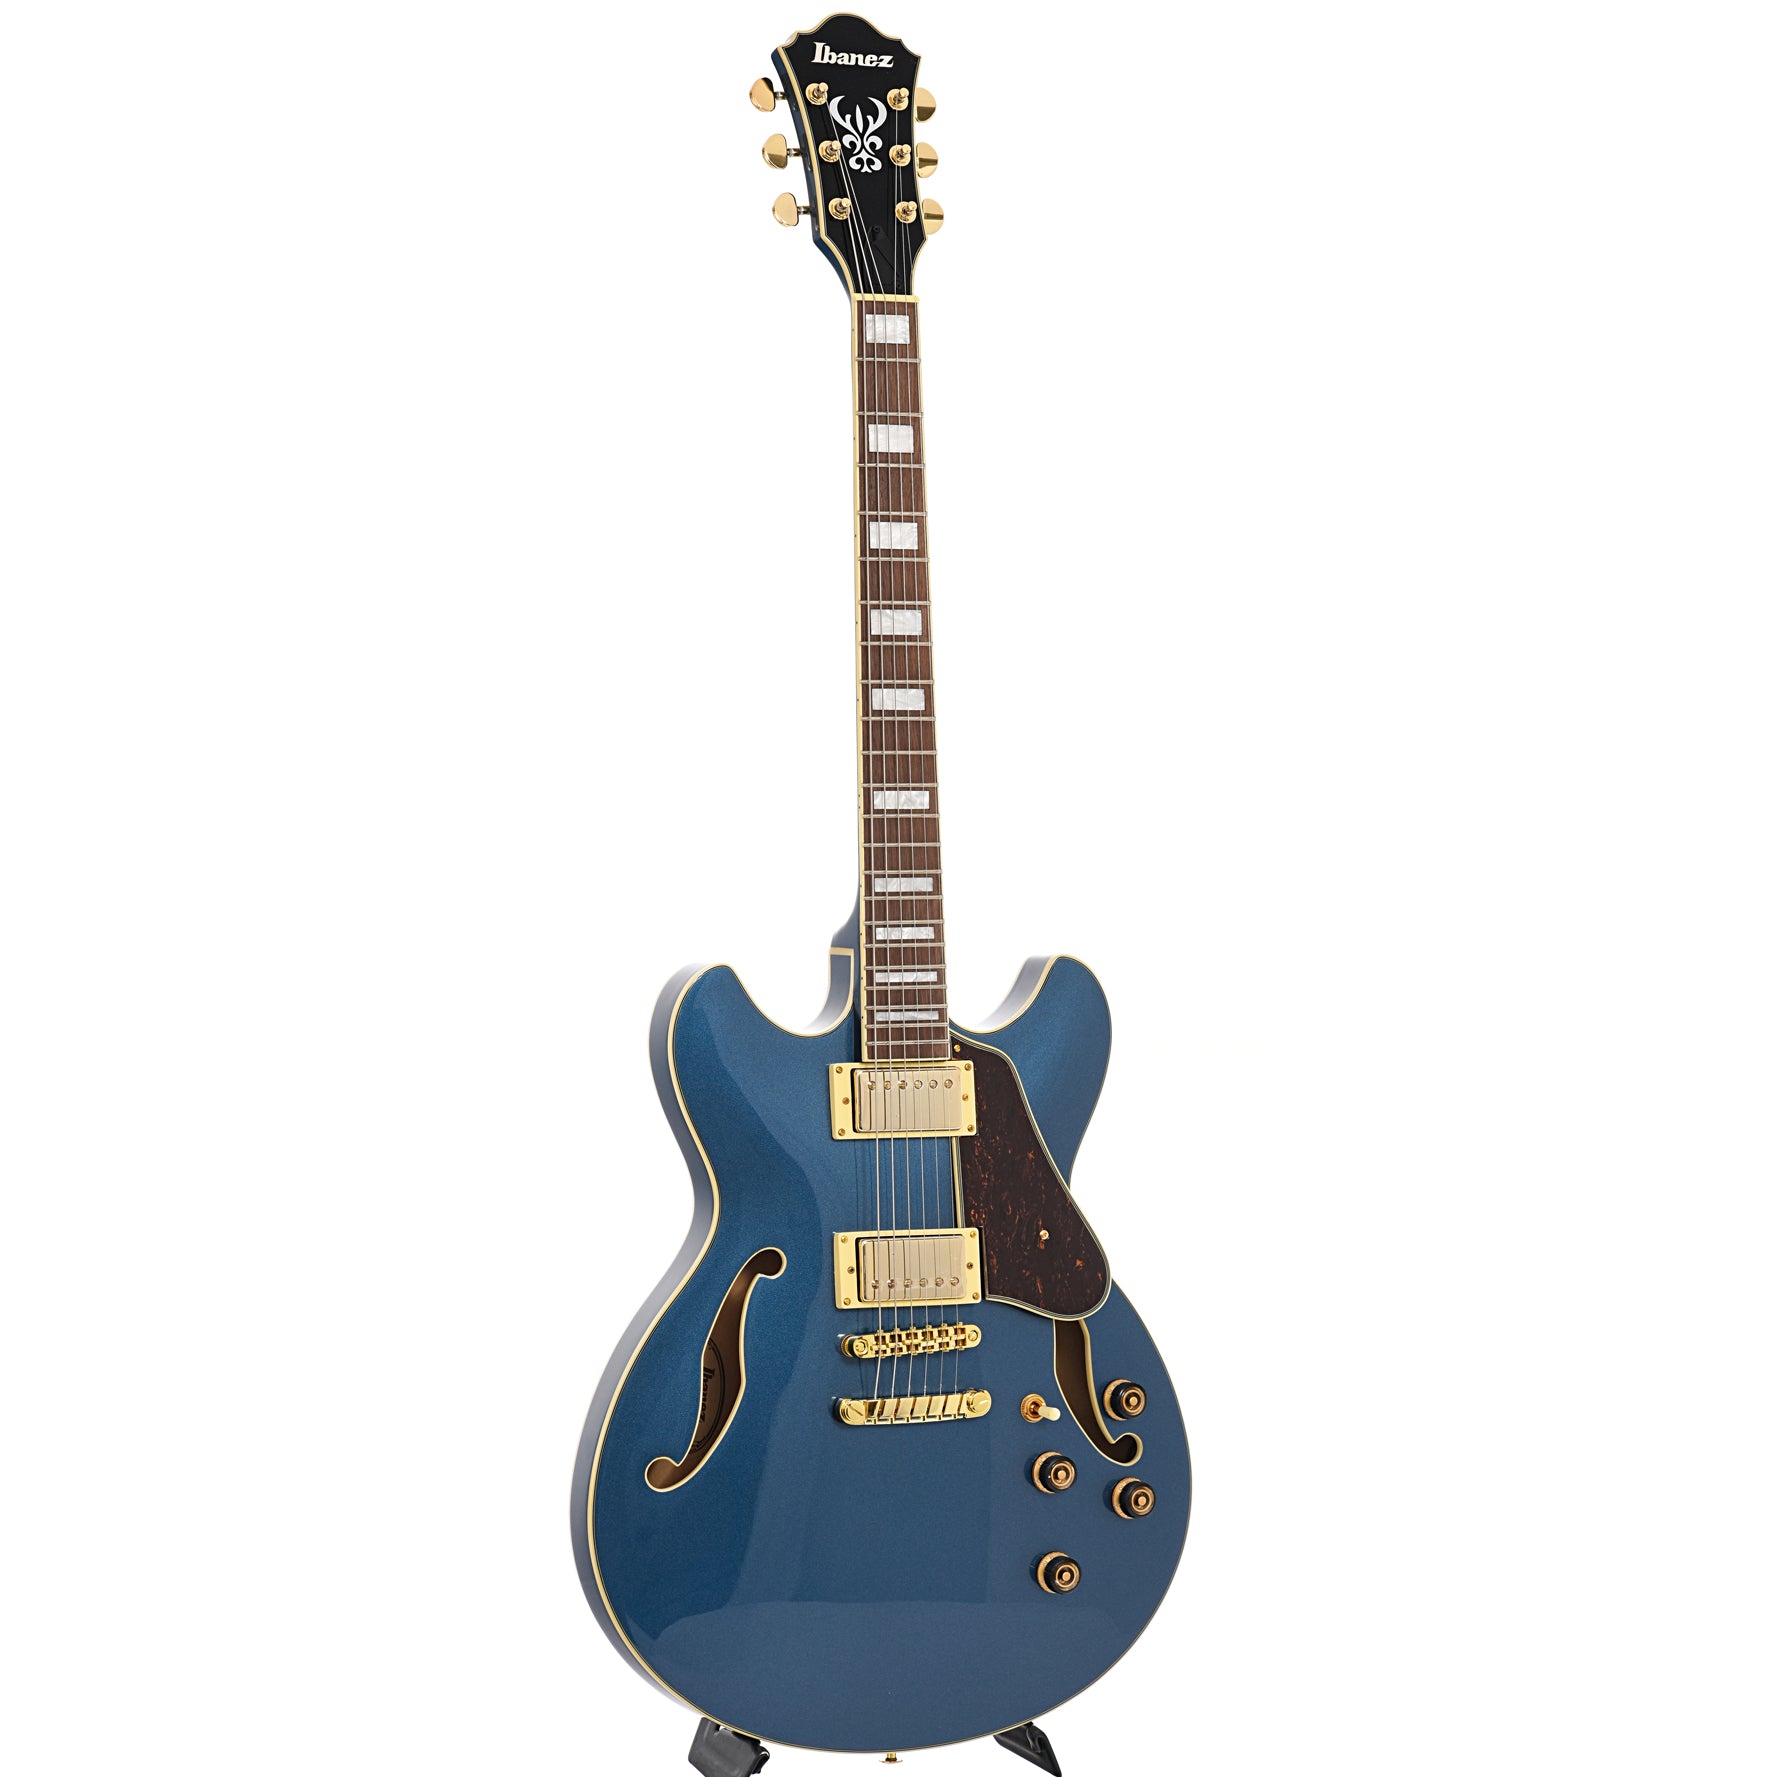 Full front and side of Ibanez Artcore AS73G Semi-Hollowbody Prussian Blue Metallic